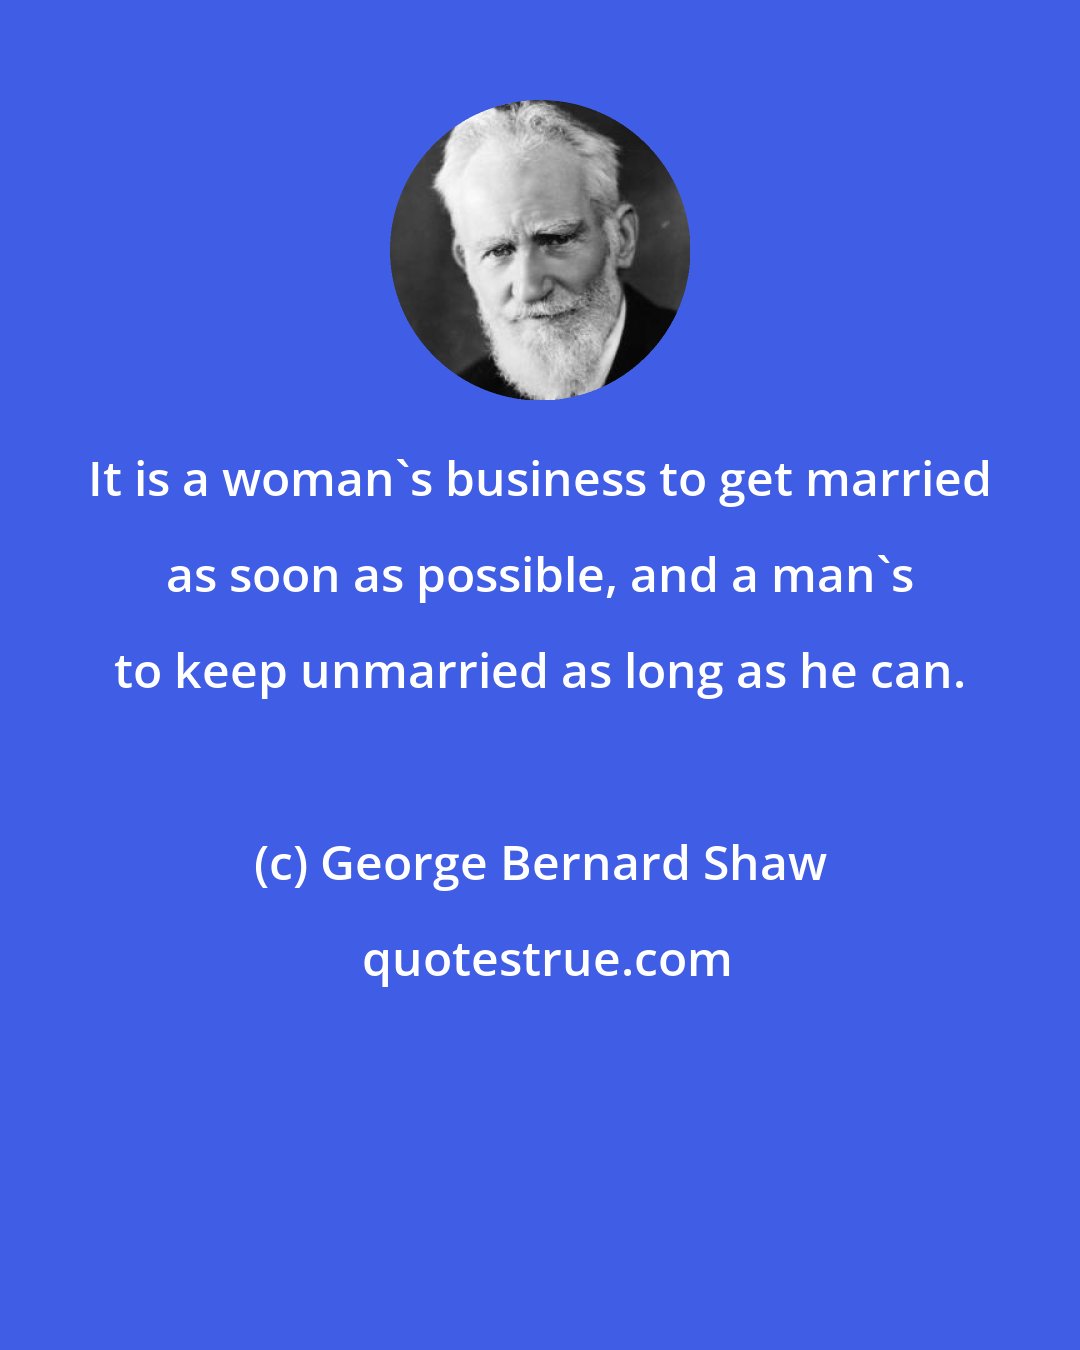 George Bernard Shaw: It is a woman's business to get married as soon as possible, and a man's to keep unmarried as long as he can.